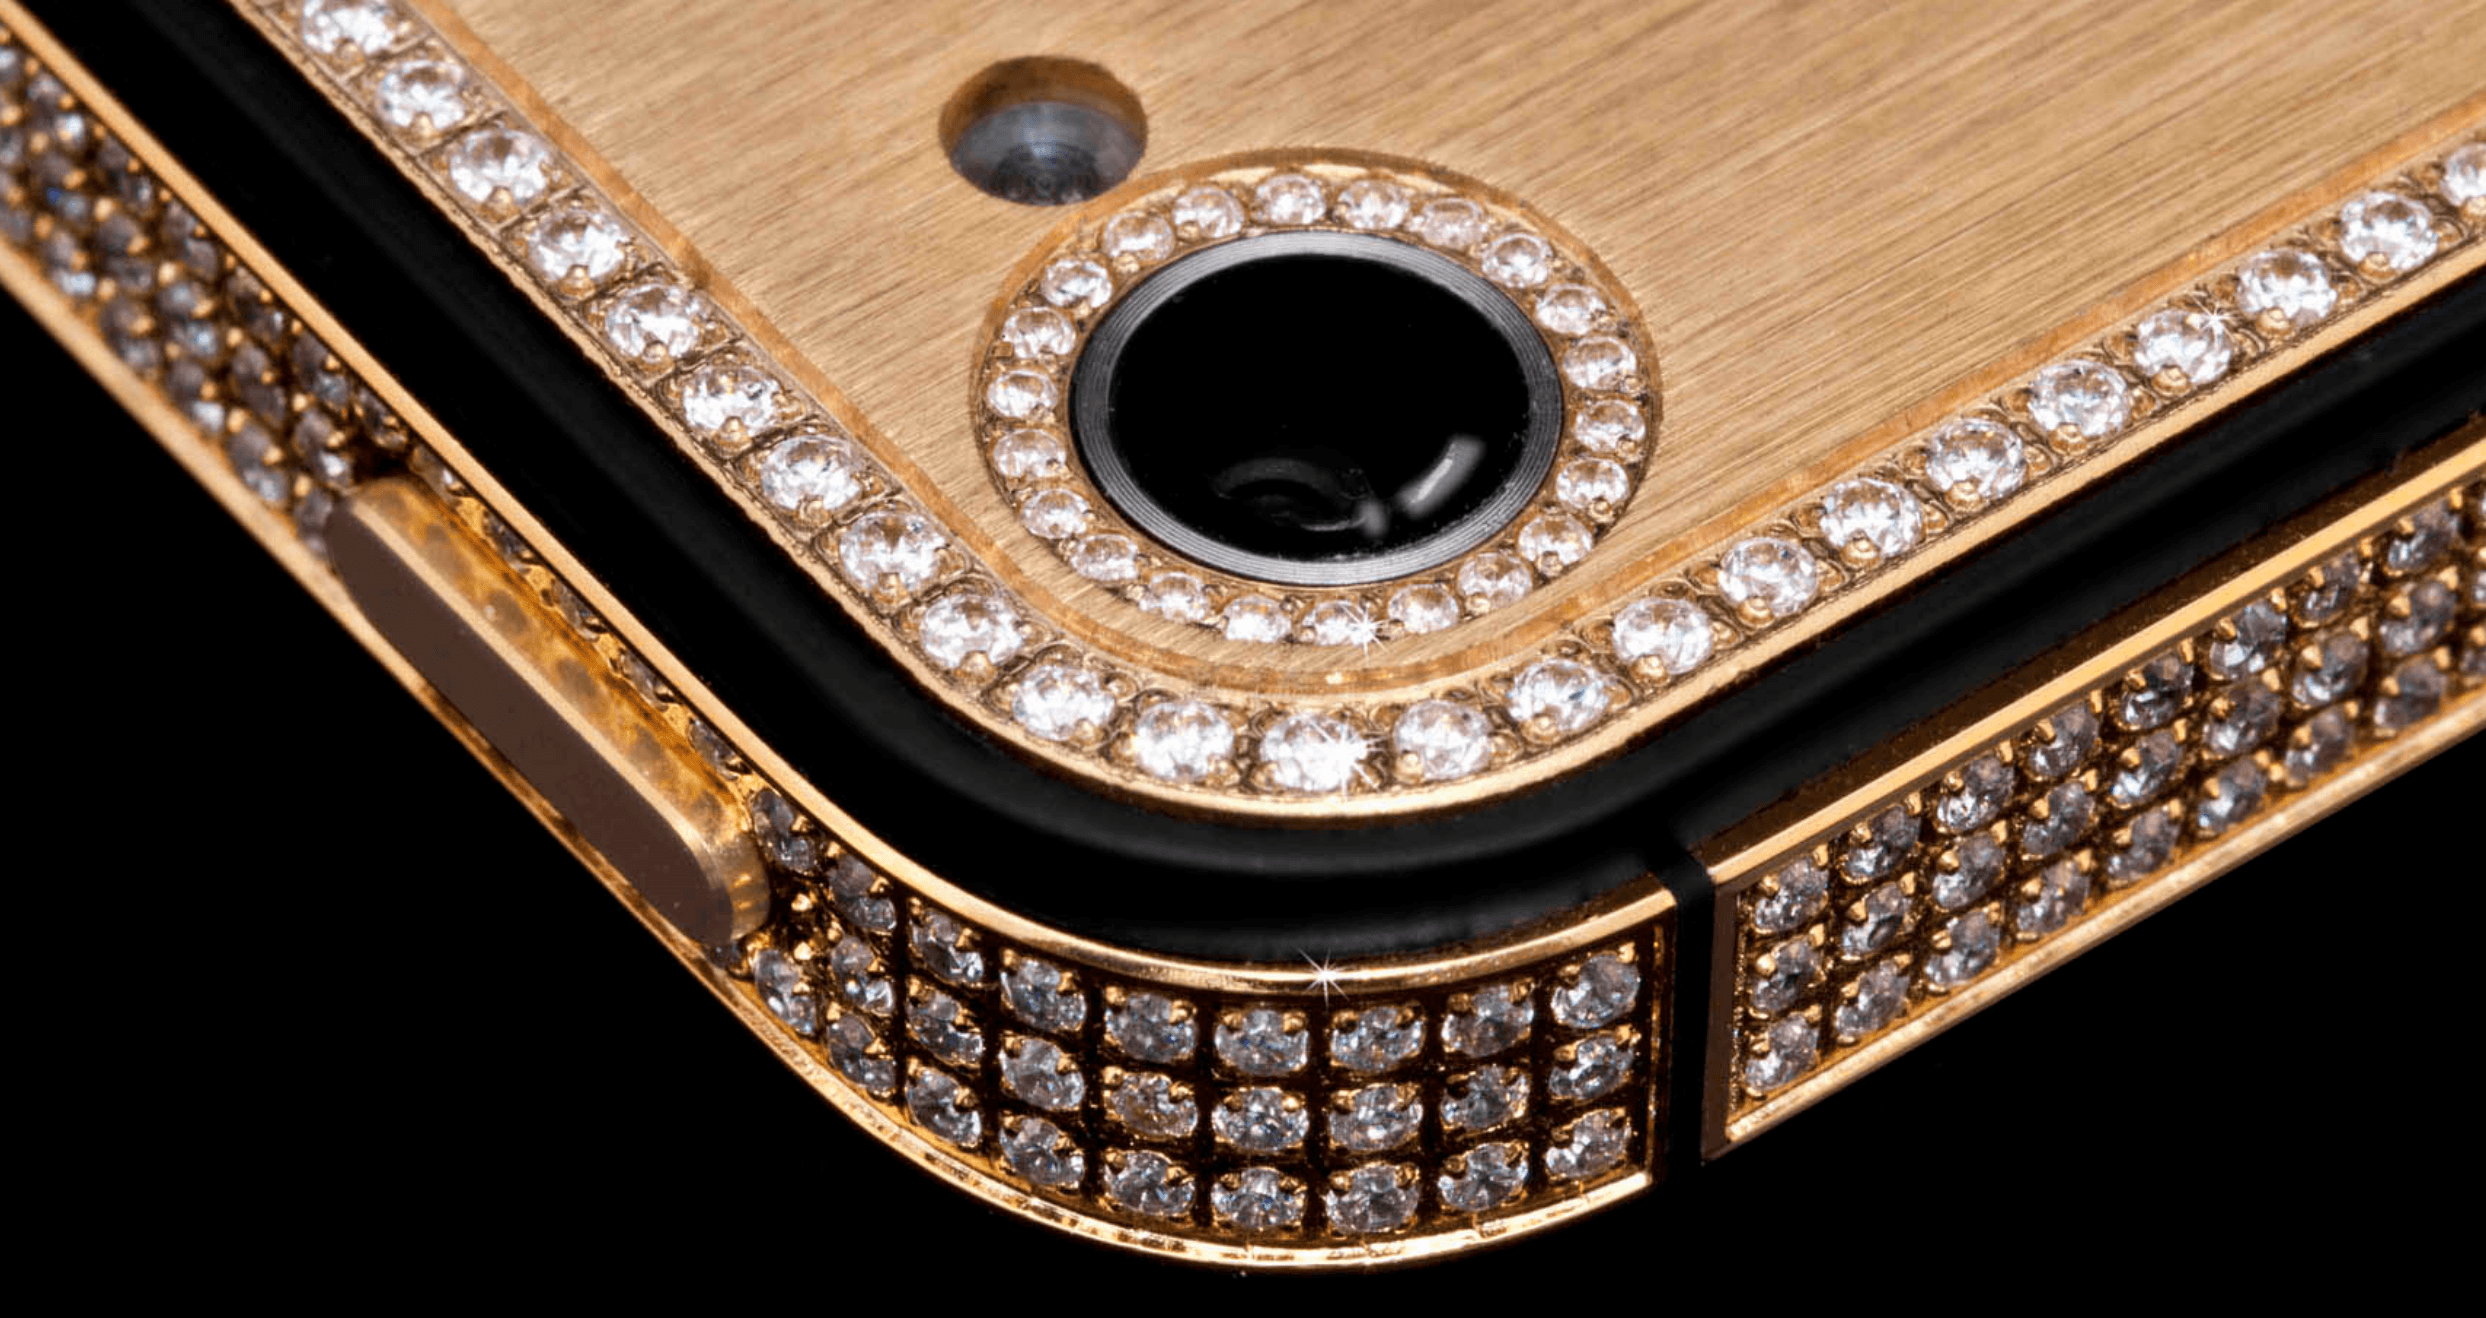 Gold and Diamond Apple Logo - Million dollar iPhone 5 appears diamond-encrusted and in 24-carat ...